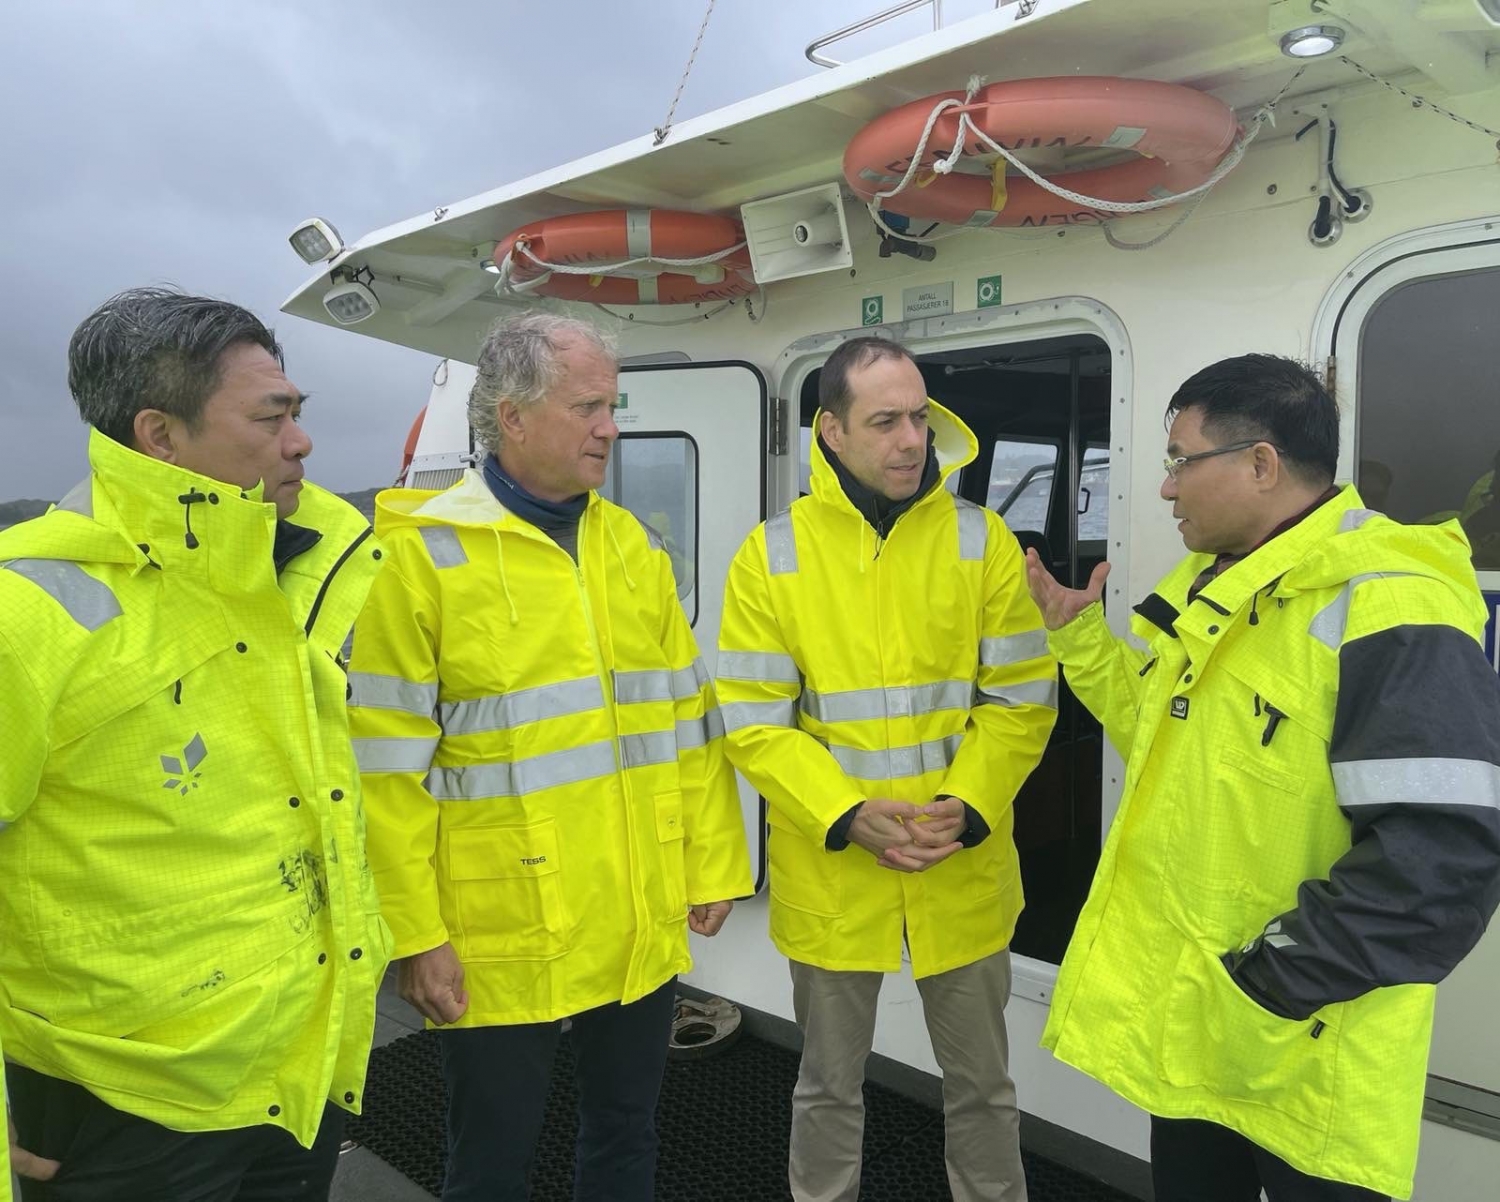 Petrovietnam President and CEO Le Manh Hung visits assembly site of Equinor’s Hywind Tampen floating offshore wind power project in Gulen, Norway